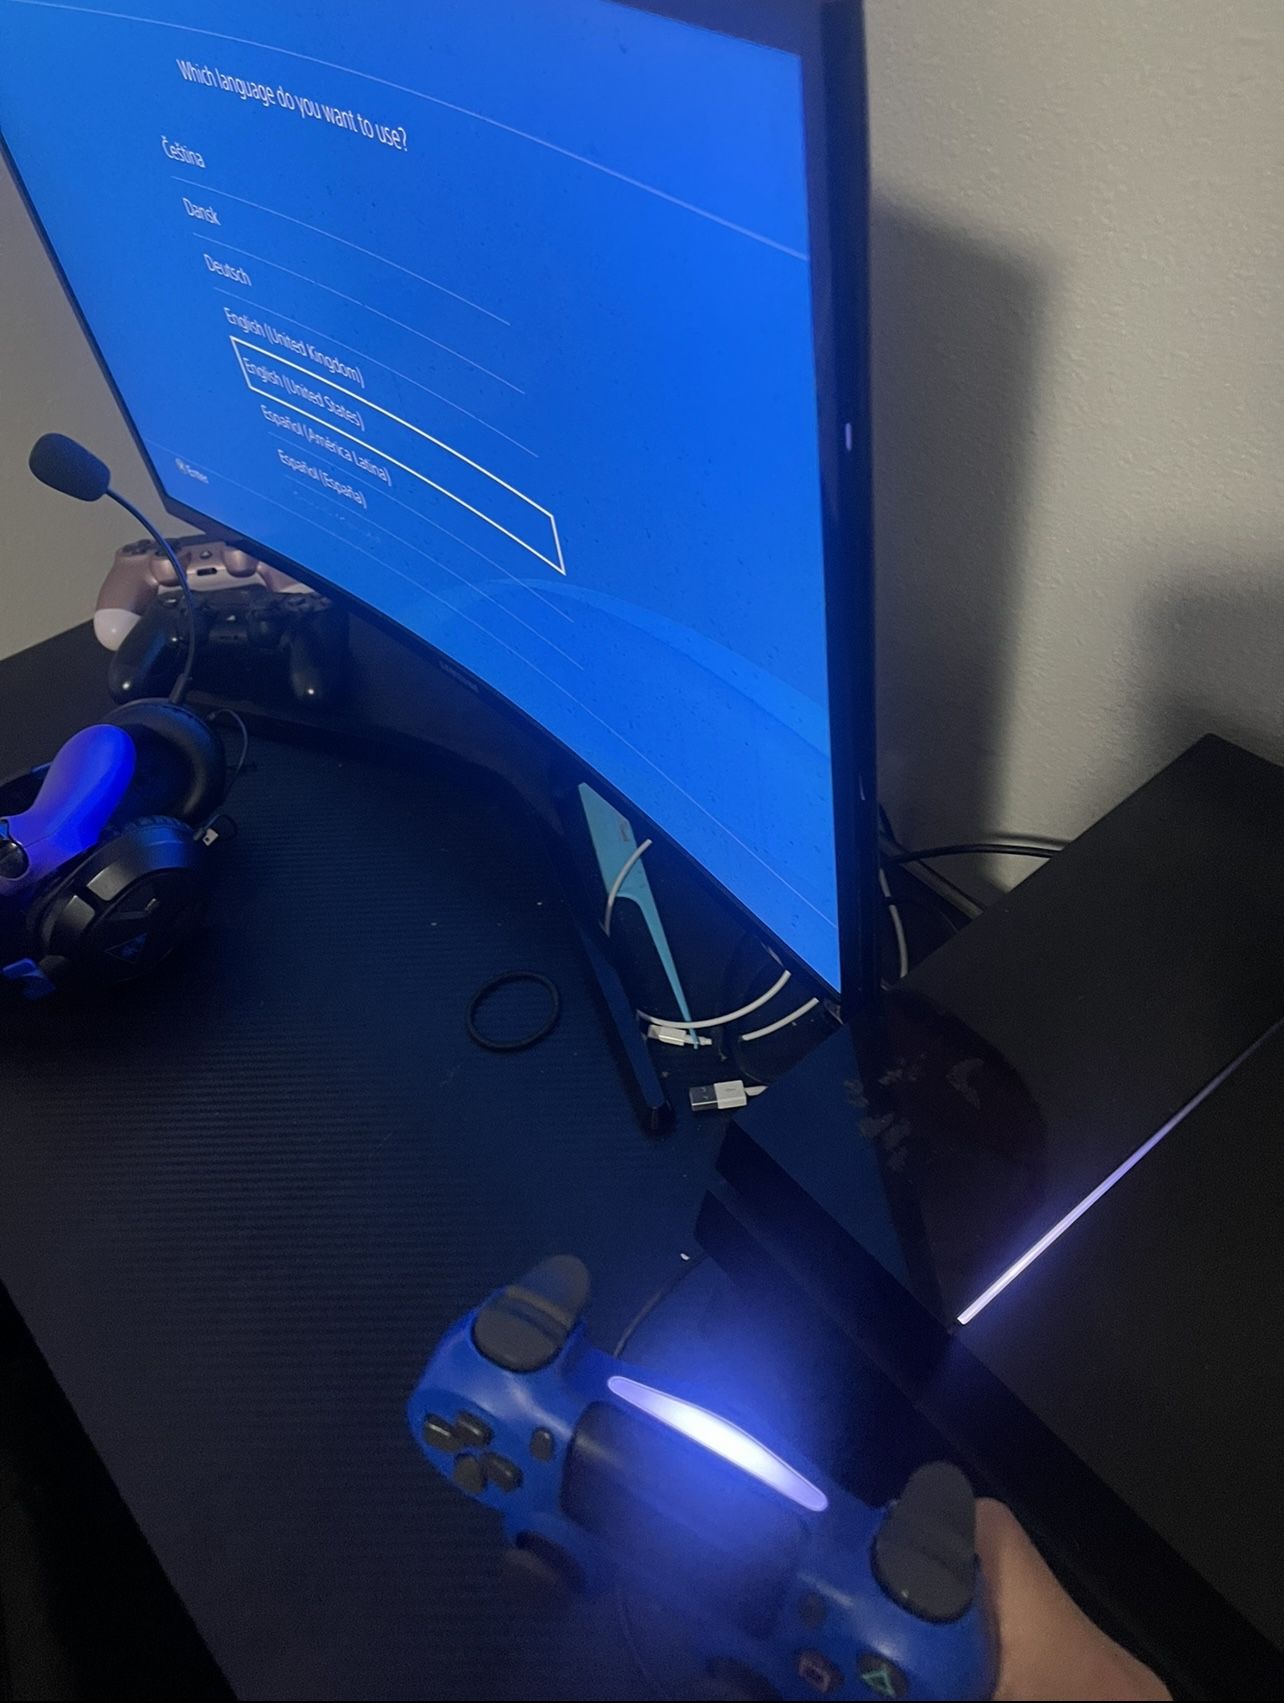 PS4 wit controller, Samsung 60hz monitor 